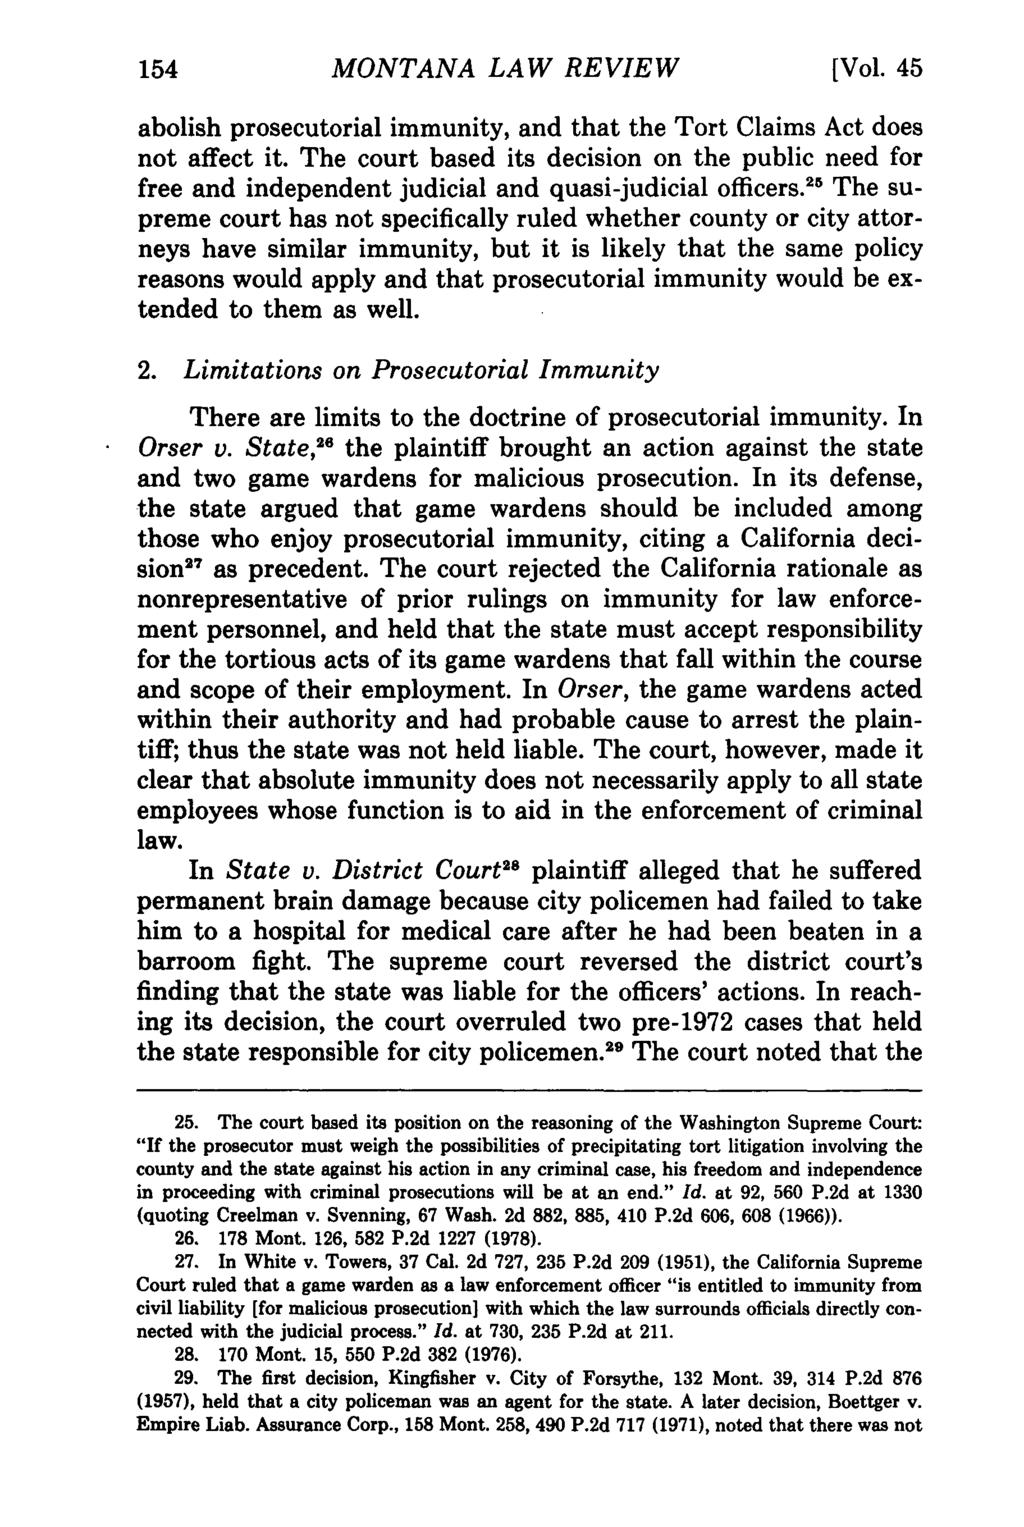 Montana Law Review, Vol. 45 [1984], Iss. 1, Art. 7 MONTANA LAW REVIEW [Vol. 45 abolish prosecutorial immunity, and that the Tort Claims Act does not affect it.